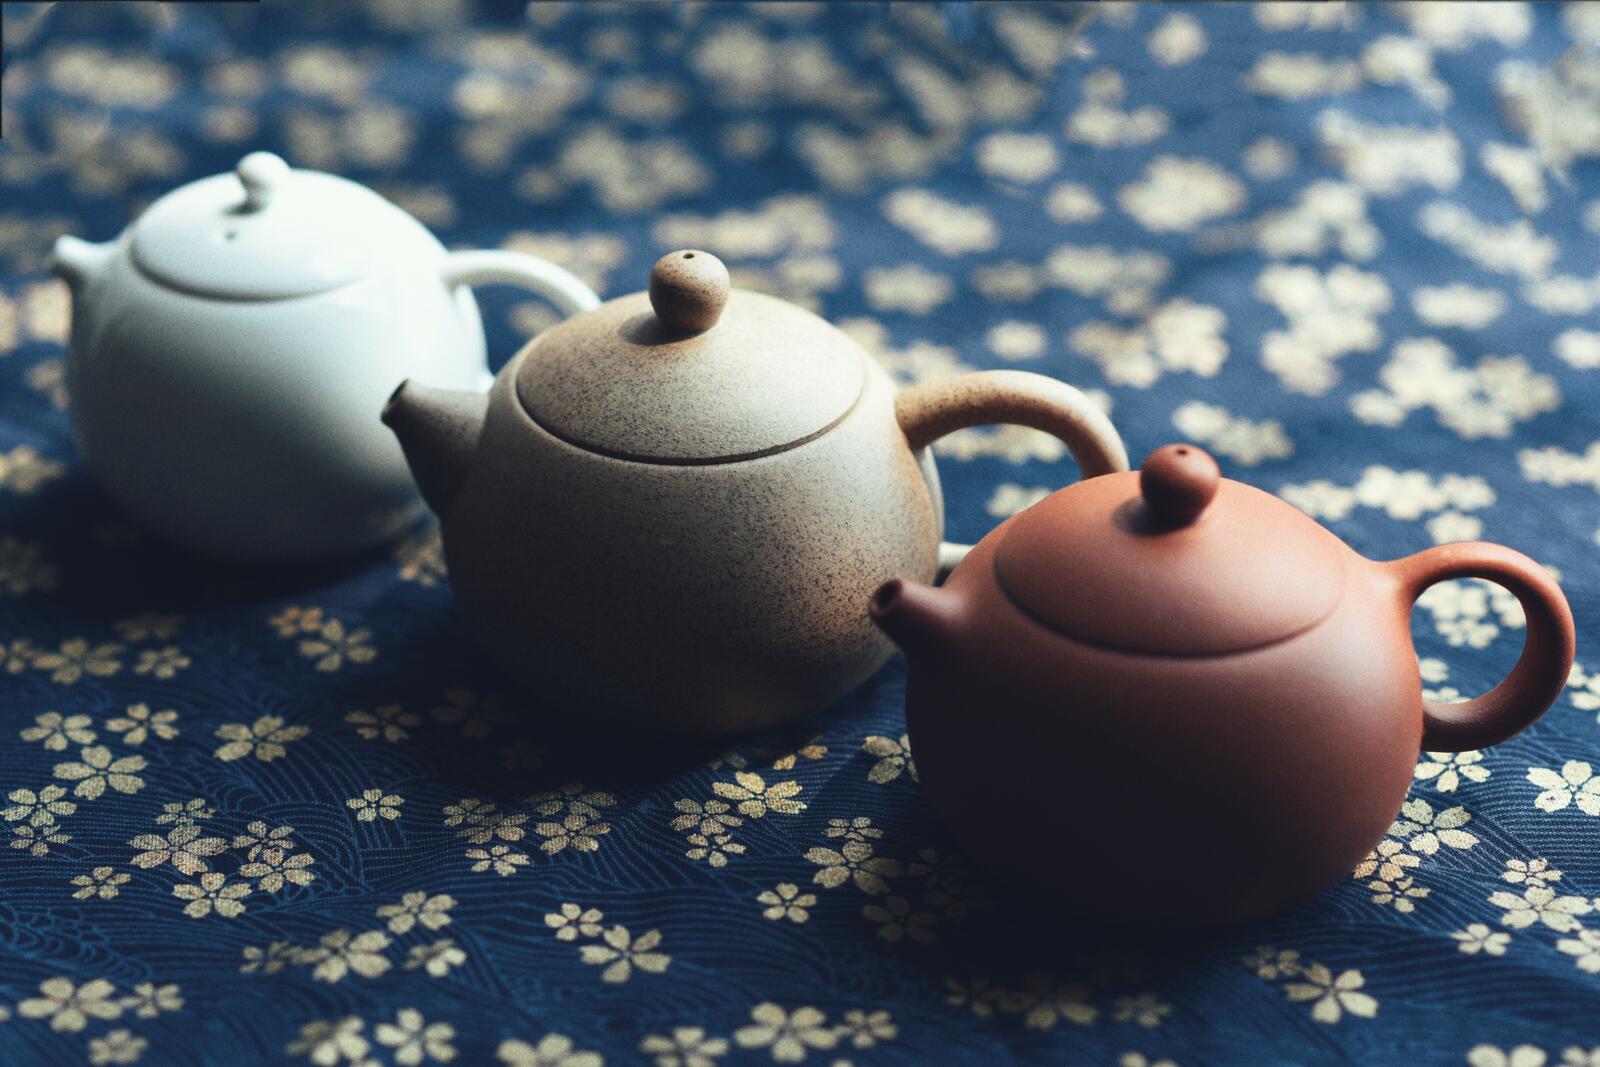 Free photo Three ceramic teapots stand on a blue fabric with florals